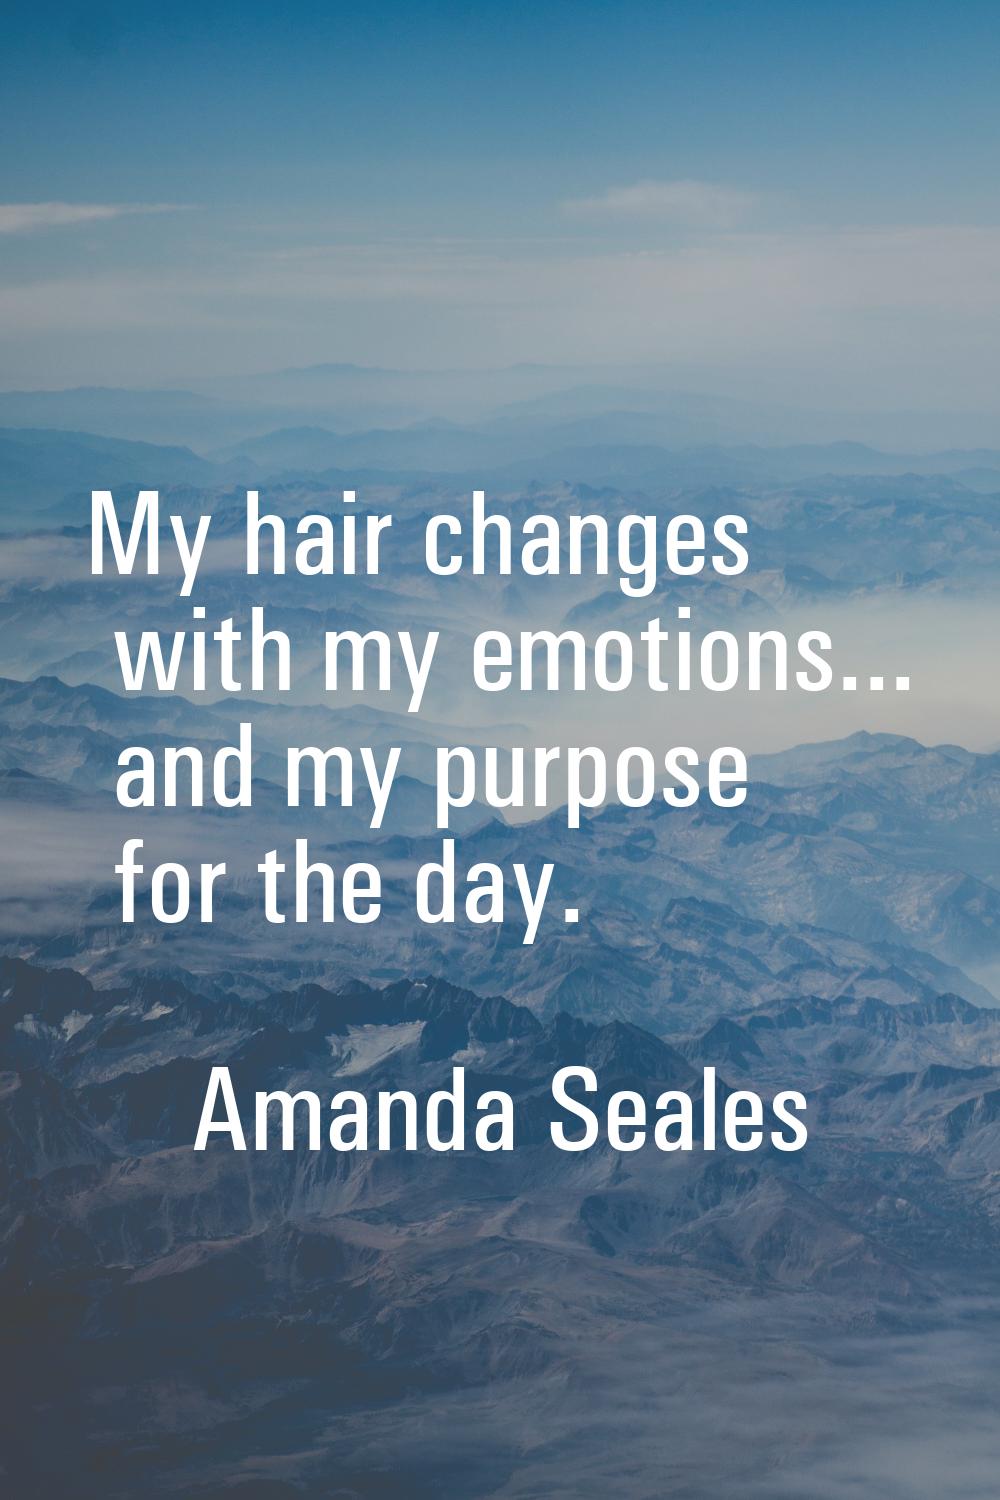 My hair changes with my emotions... and my purpose for the day.